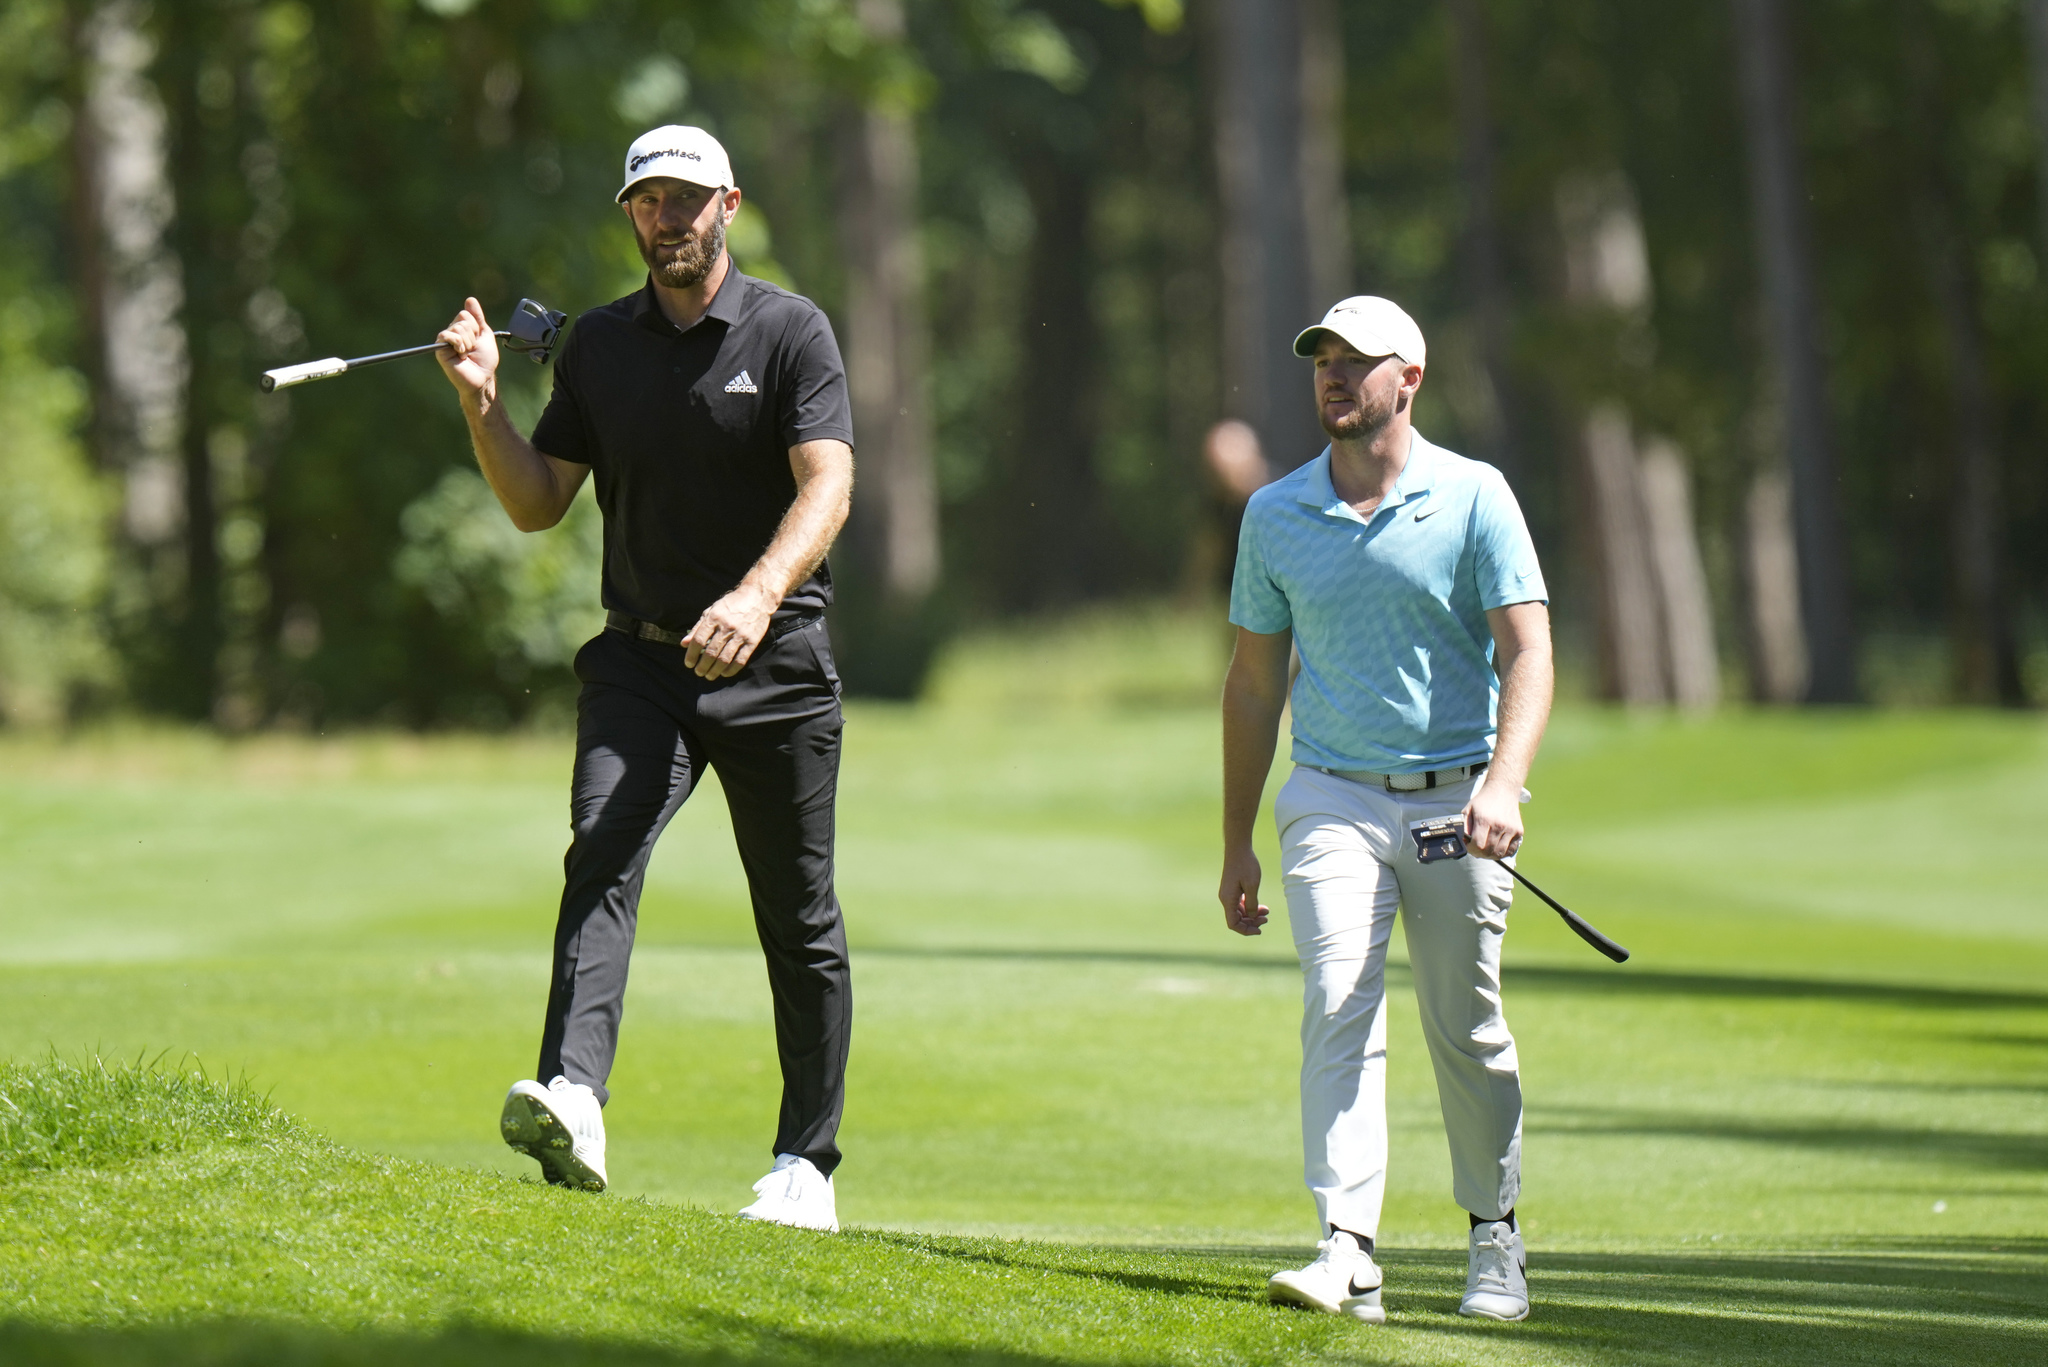 Dustin Johnson and Sam Horsfield walk on the course during the final round of the inaugural LIV Golf Invitational.